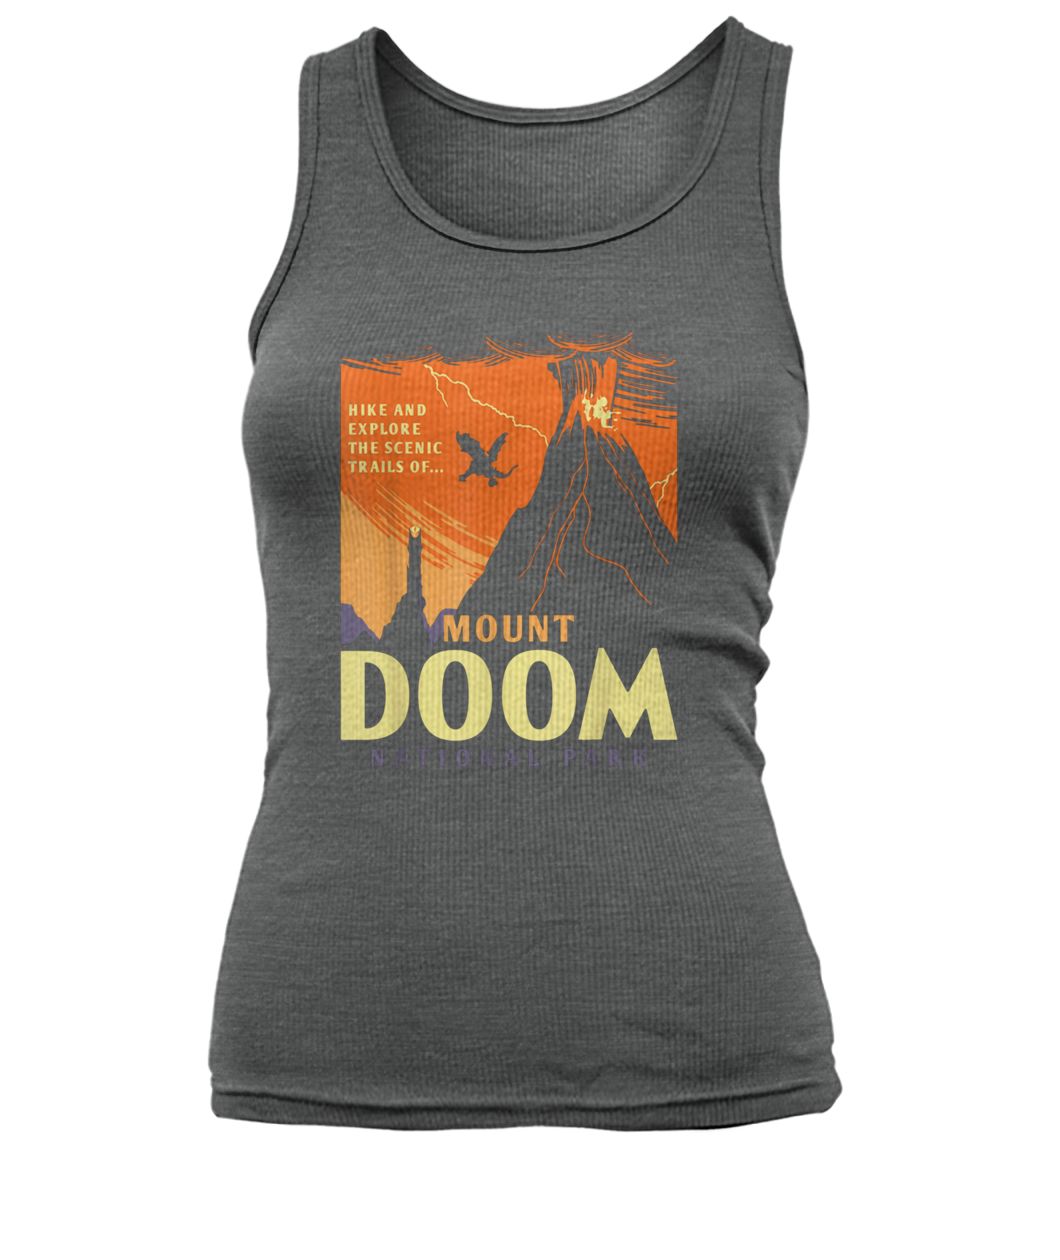 Lord of the rings mount doom national park women's tank top